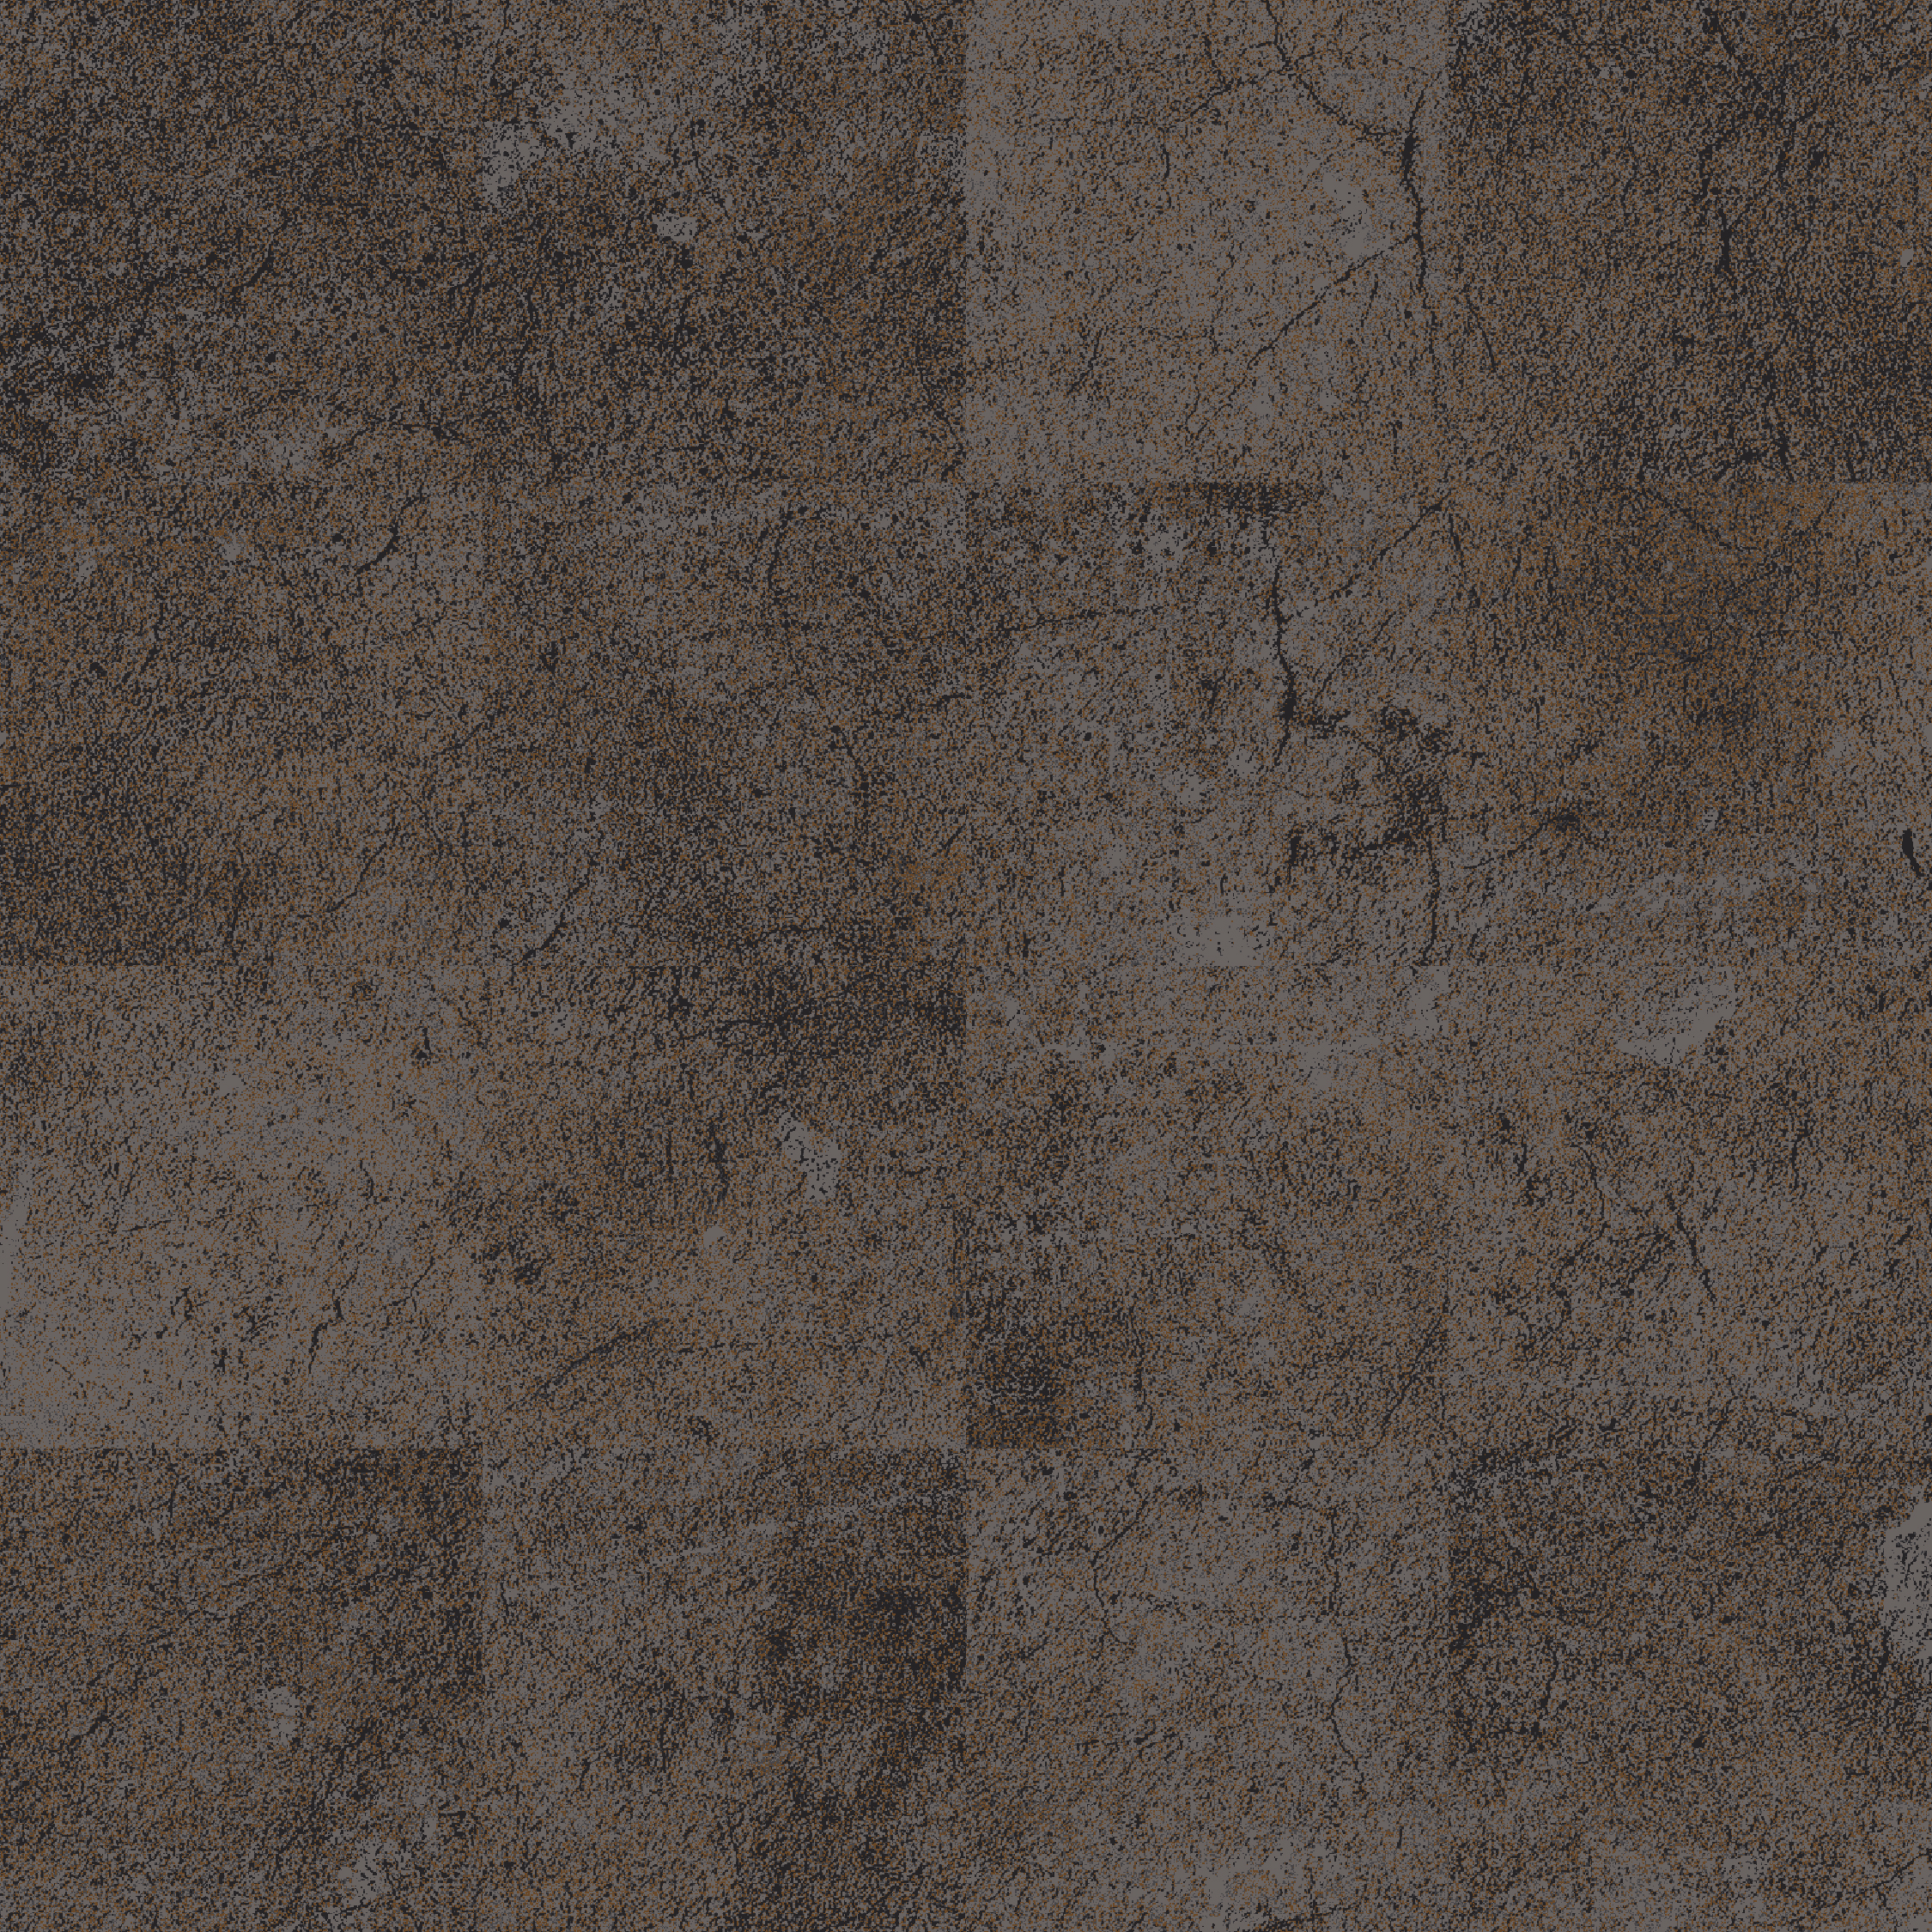 Stone Surface brown